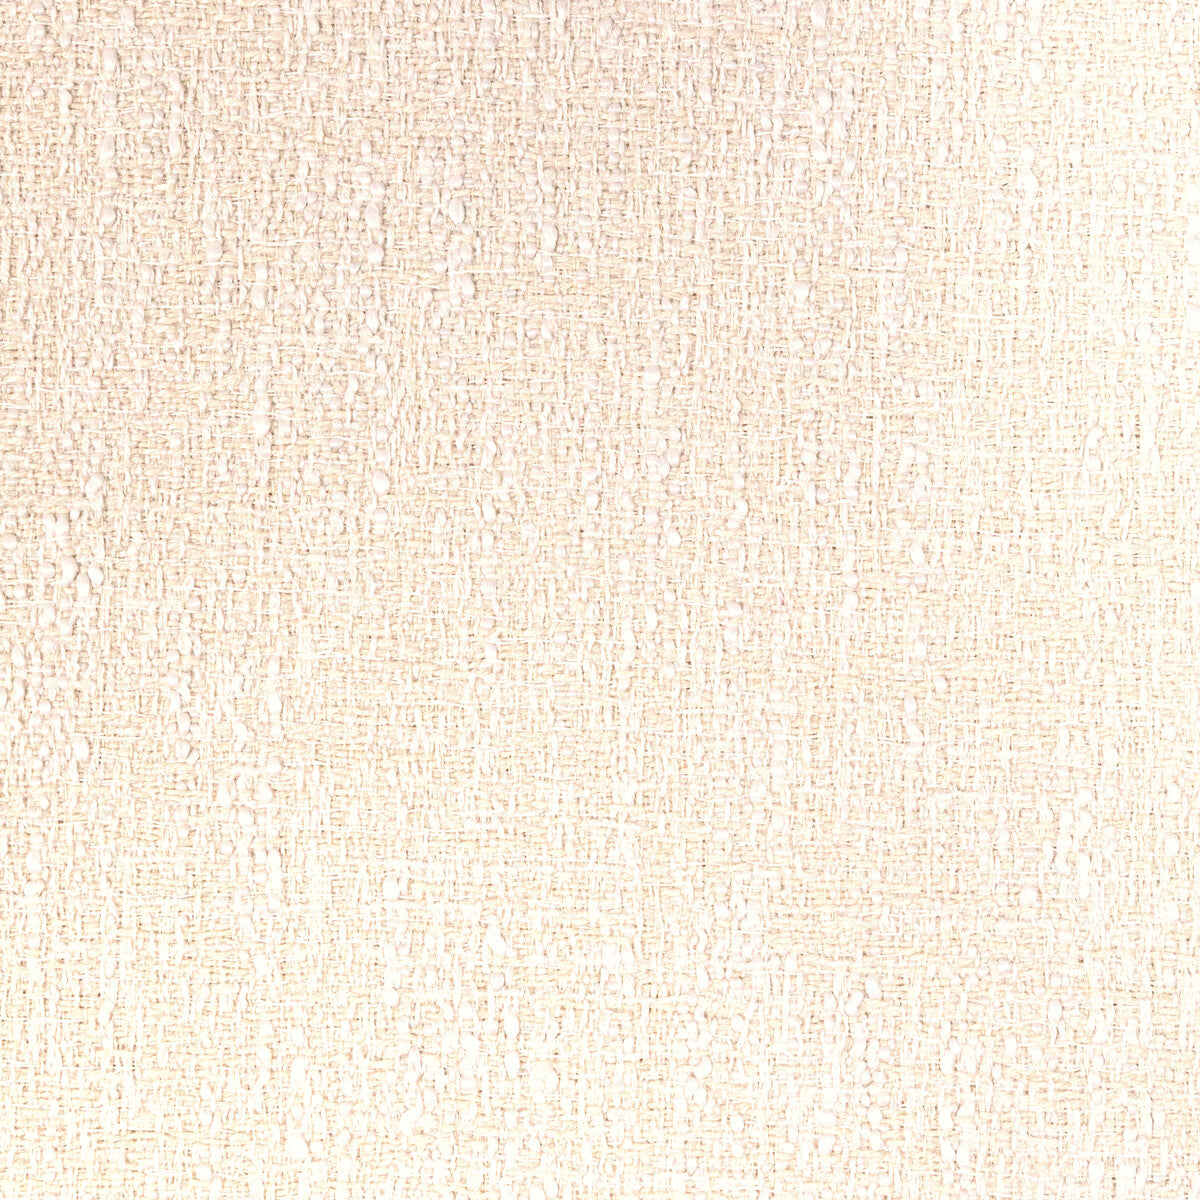 Landry fabric in bisque color - pattern 36745.1.0 - by Kravet Contract in the Refined Textures Performance Crypton collection